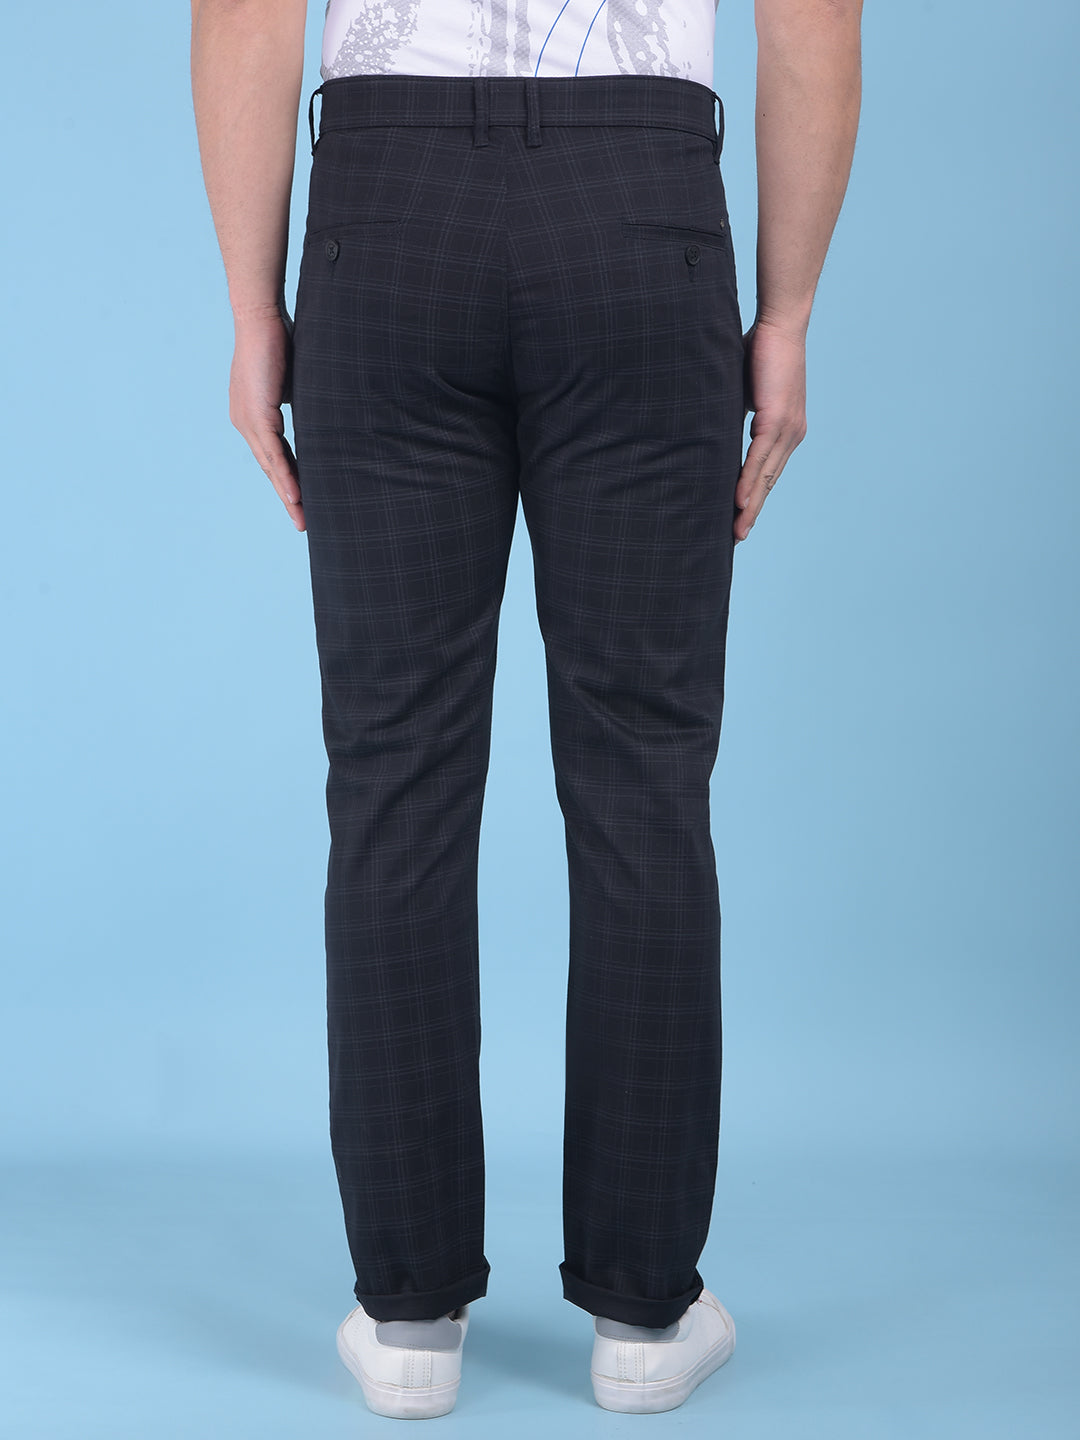 Black Checked Stretchable Trousers-Men Trousers-Crimsoune Club